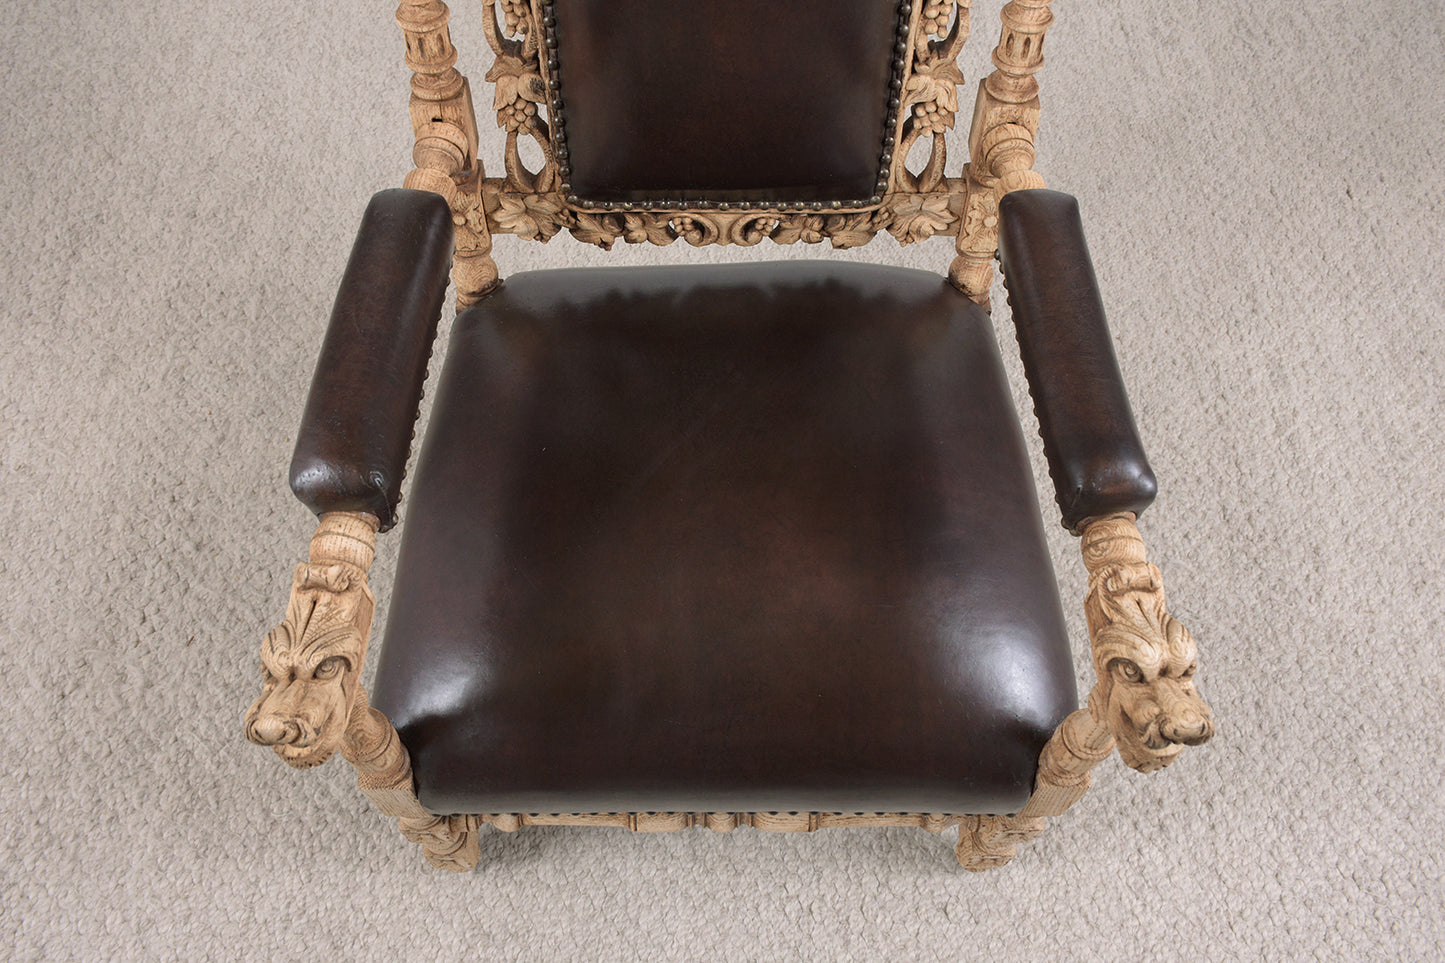 Pair of Antique French Leather Arm Chairs